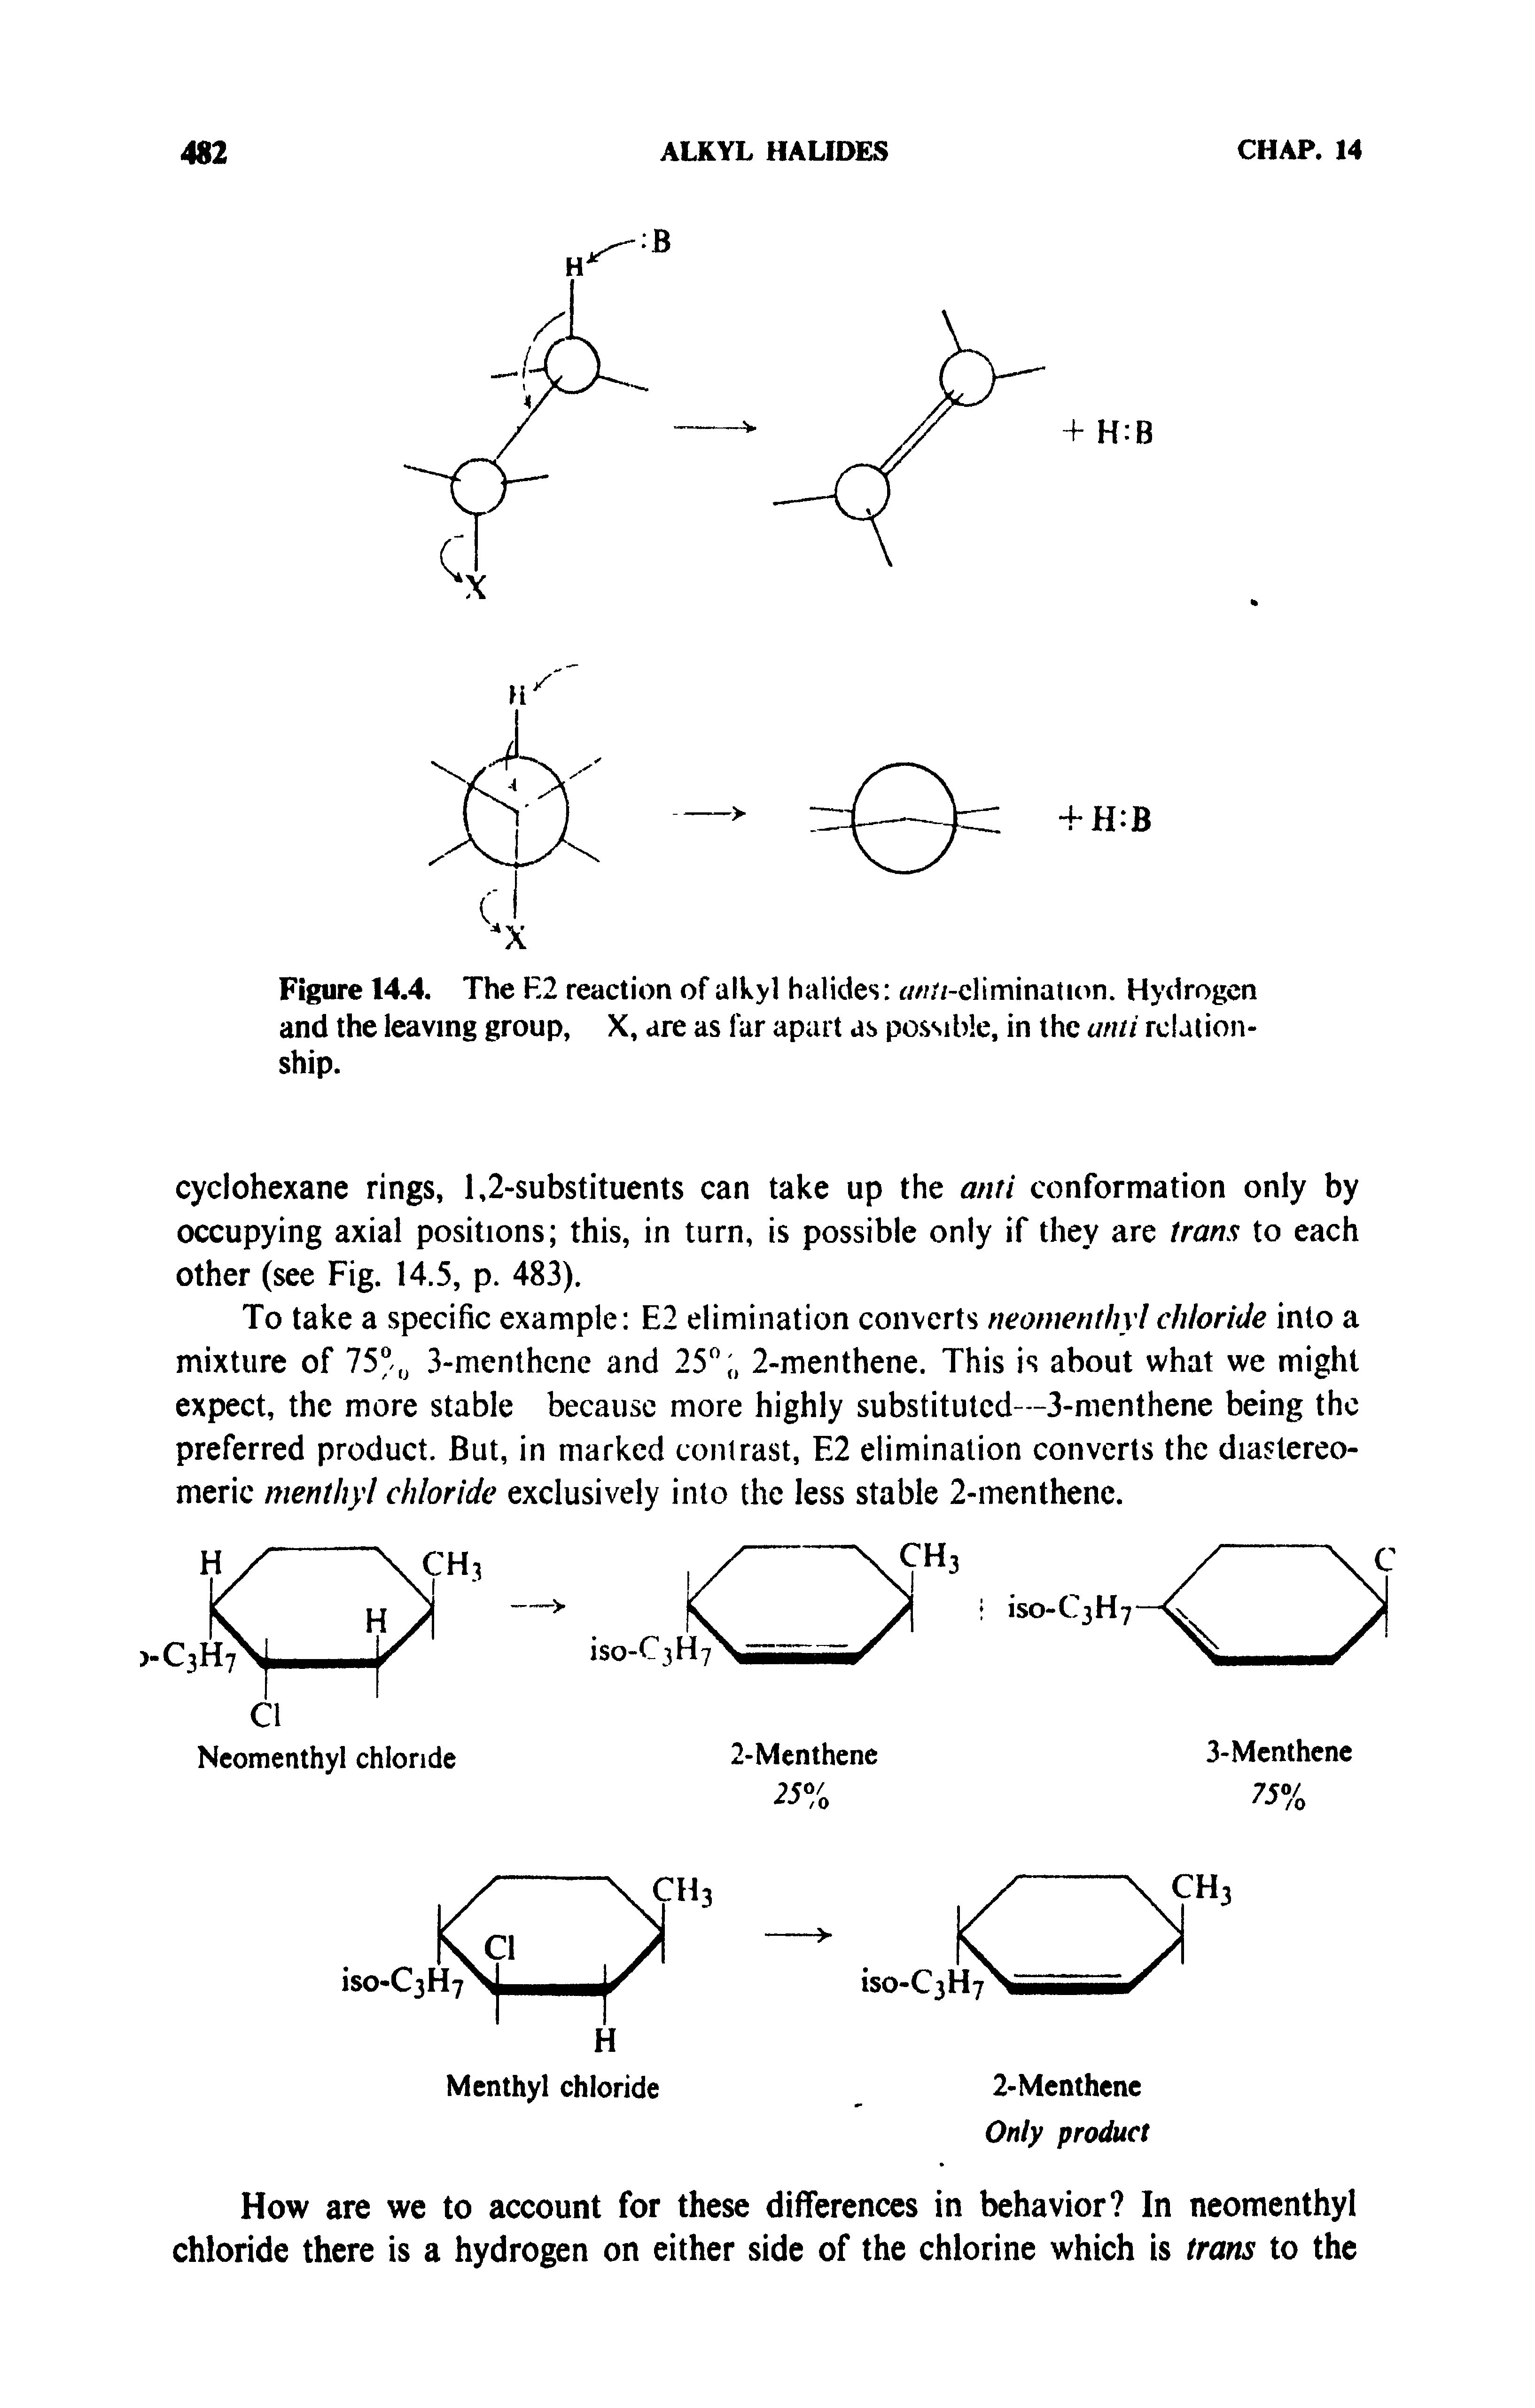 Figure 14.4. The H2 reaction of alkyl halides ////-elimination. Hydrogen and the leaving group, X, are as far apart as possible, in the anti relationship.